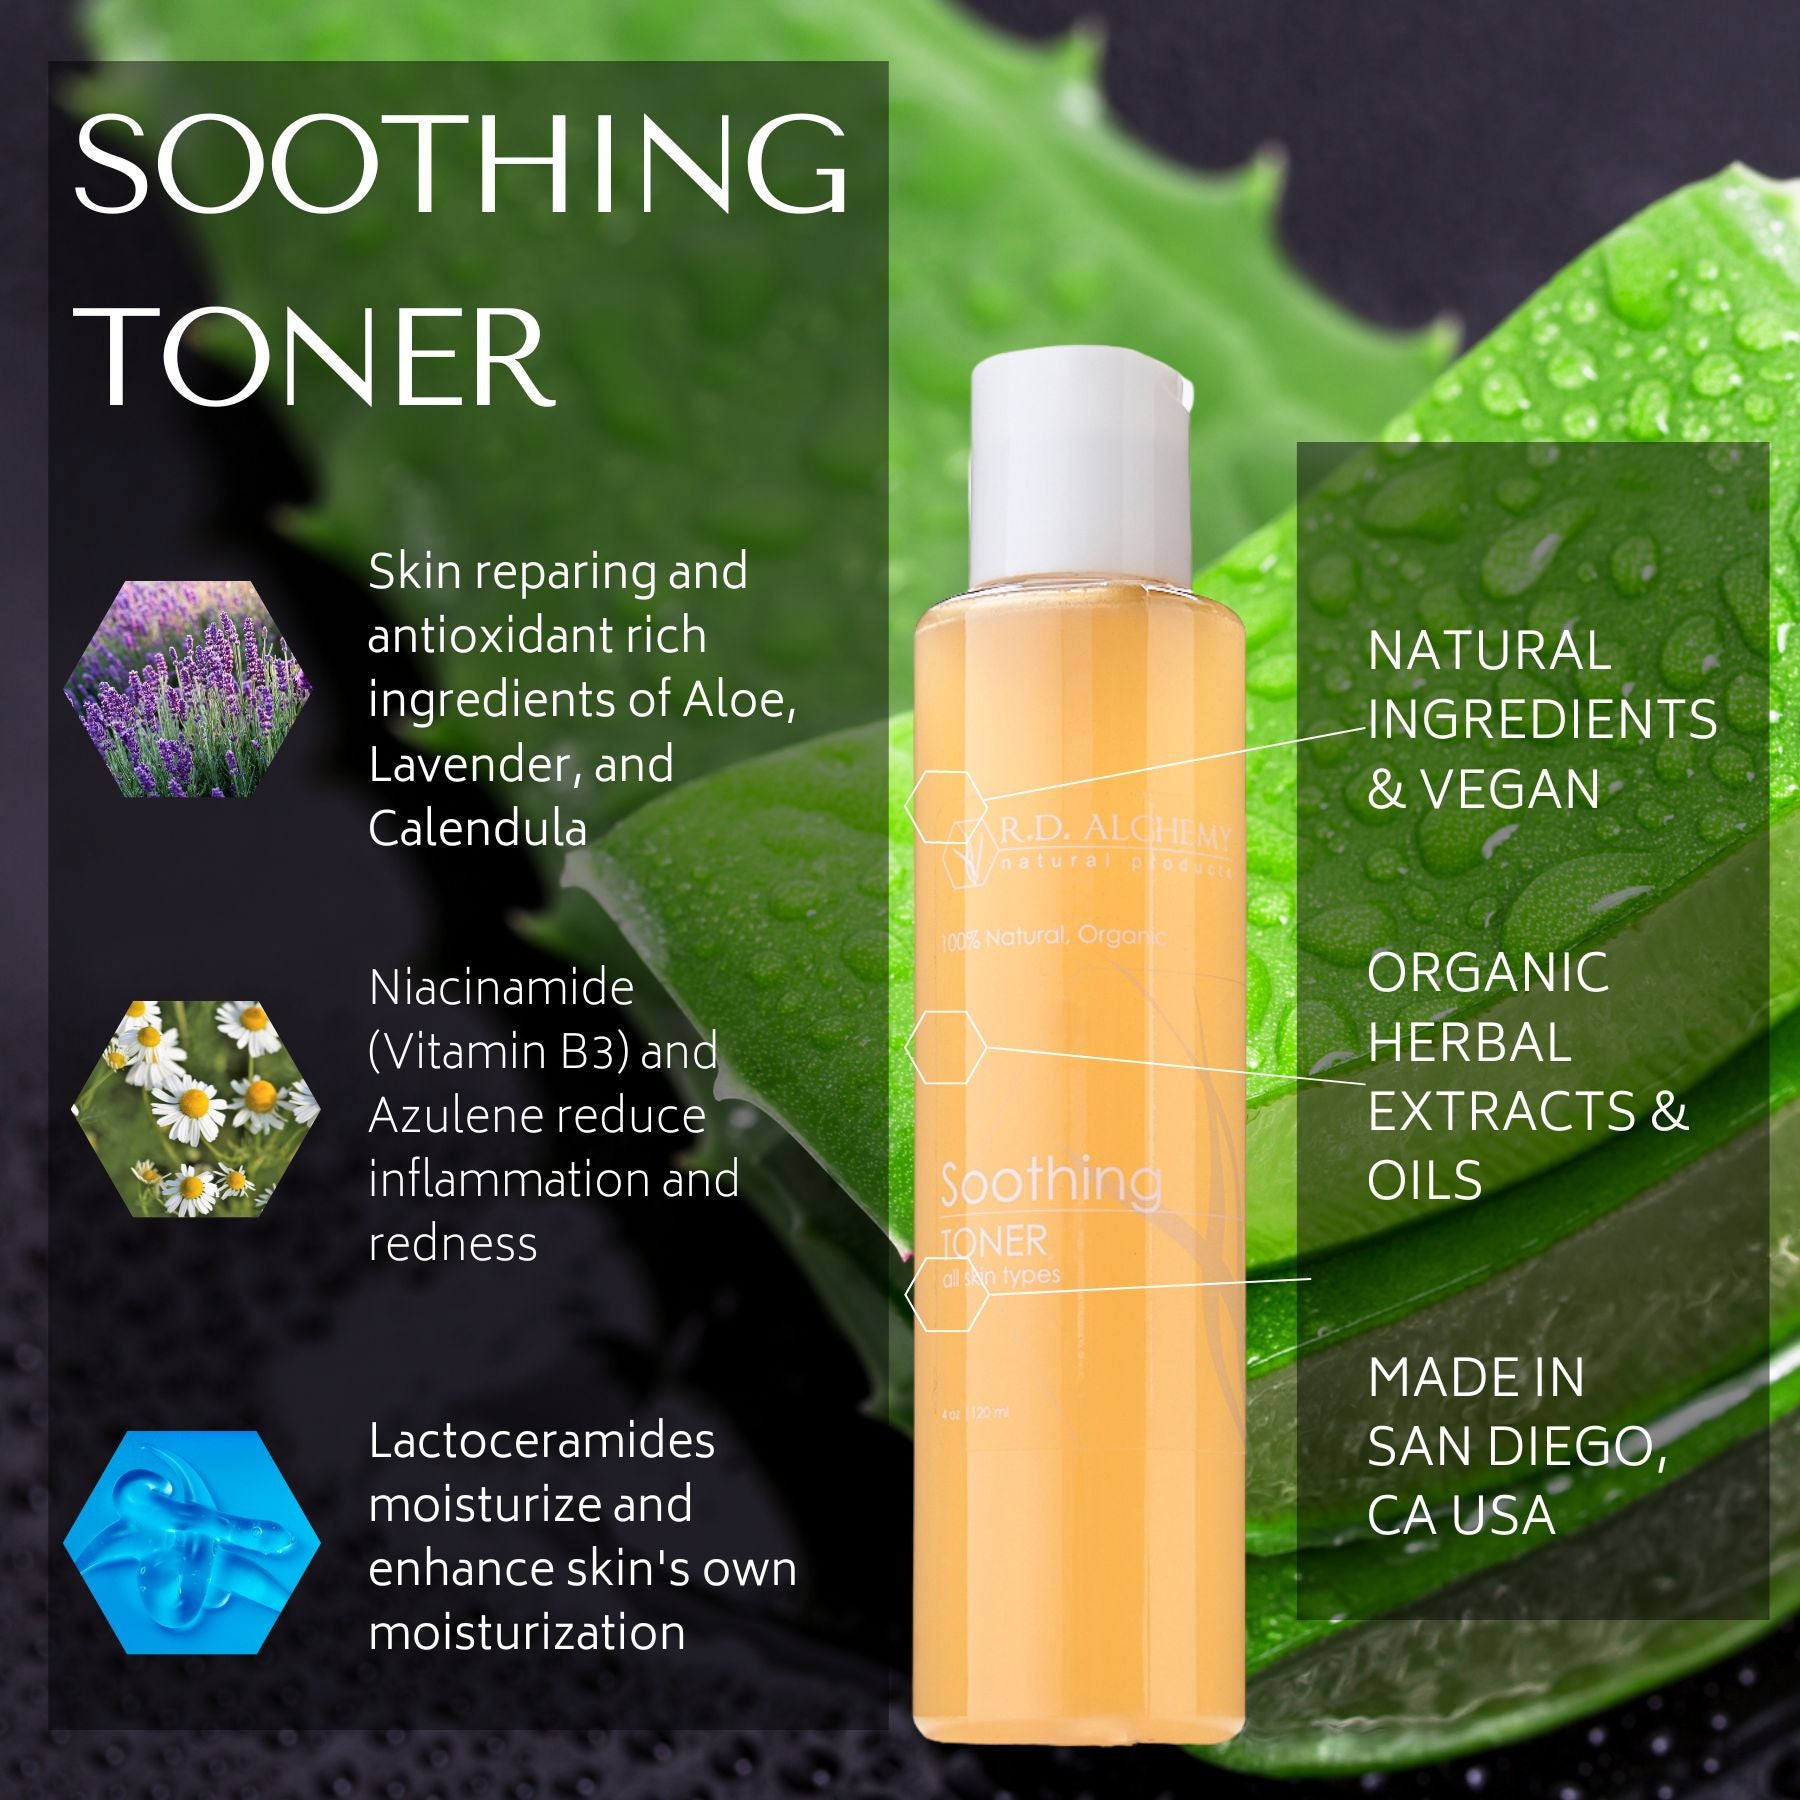 Soothing TOner